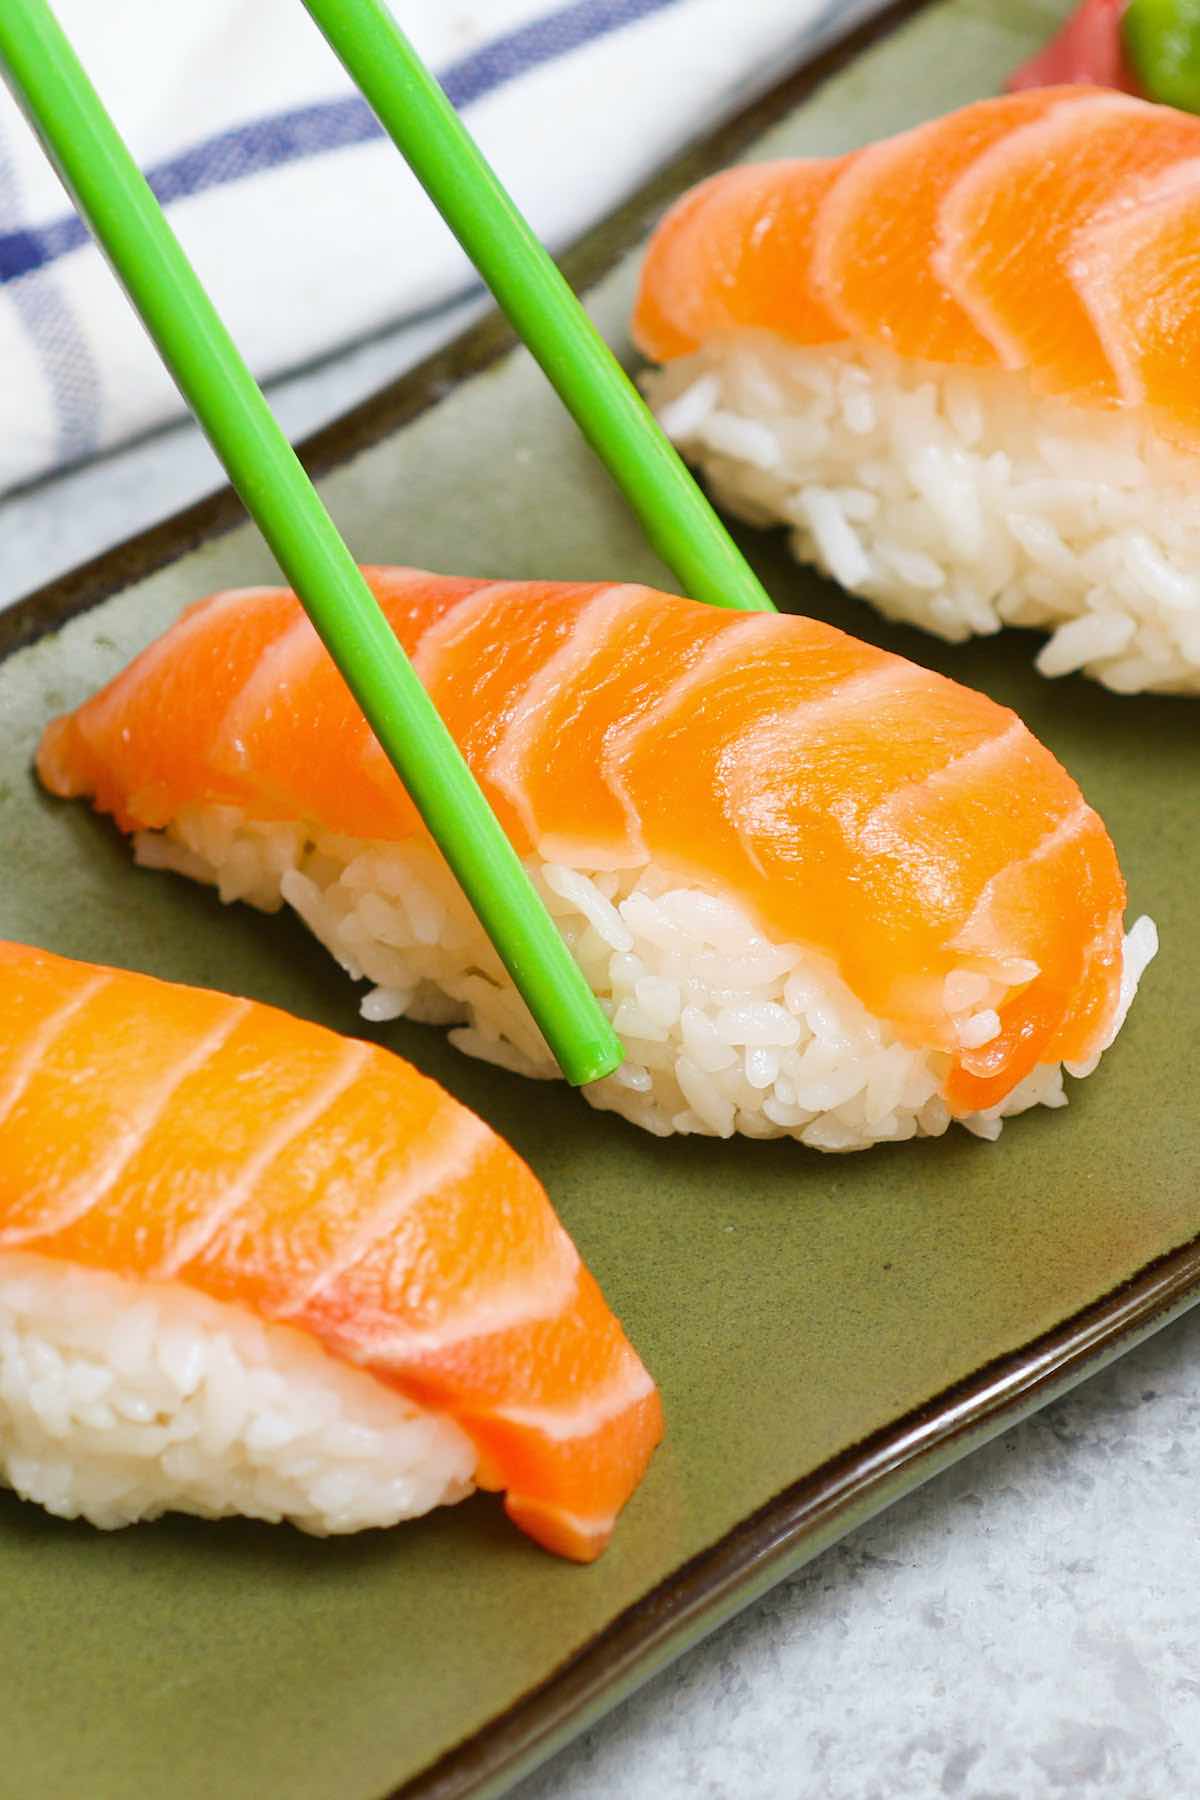 Salmon Nigiri made with sashimi-grade salmon and fluffy sushi rice! It’s so much cheaper than the restaurant, and incredibly easy to make at home. I’ll share with you the secrets to cut salmon for nigiri or sashimi and how to make salmon nigiri sushi with step by step photos.